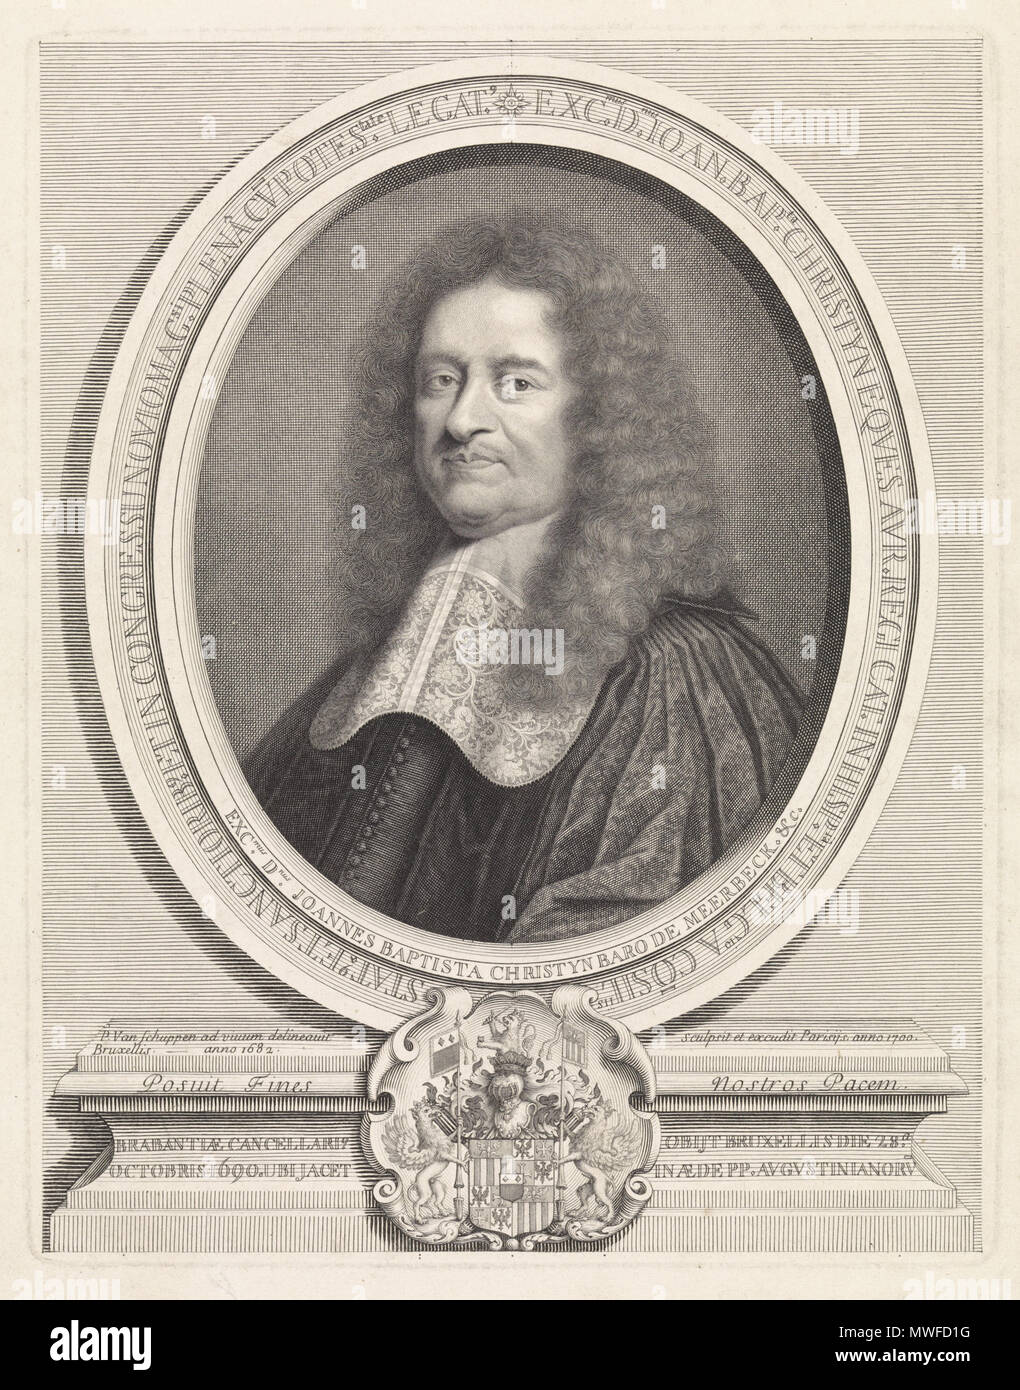 . English: A 1700 engraving by Pieter van Schuppen from a portrait of Jean-Baptiste Christyn made c. 1678 . 1700. Pieter van Schuppen 312 Jean-Baptiste Christyn, Chancellor of Brabant Stock Photo